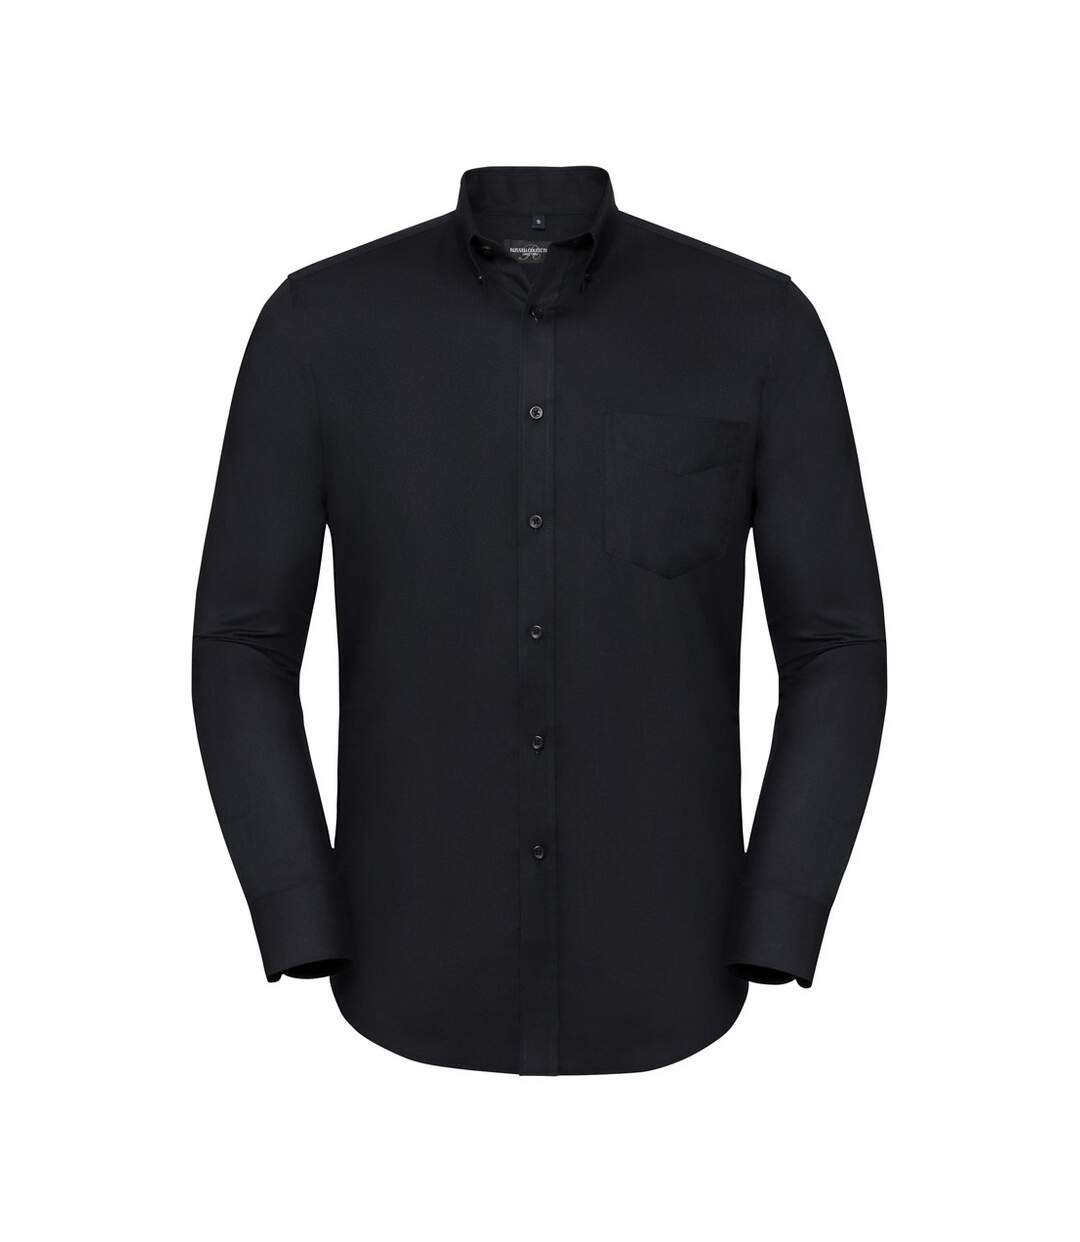 Russell Collection - Chemise - Homme (Noir) - UTPC3671